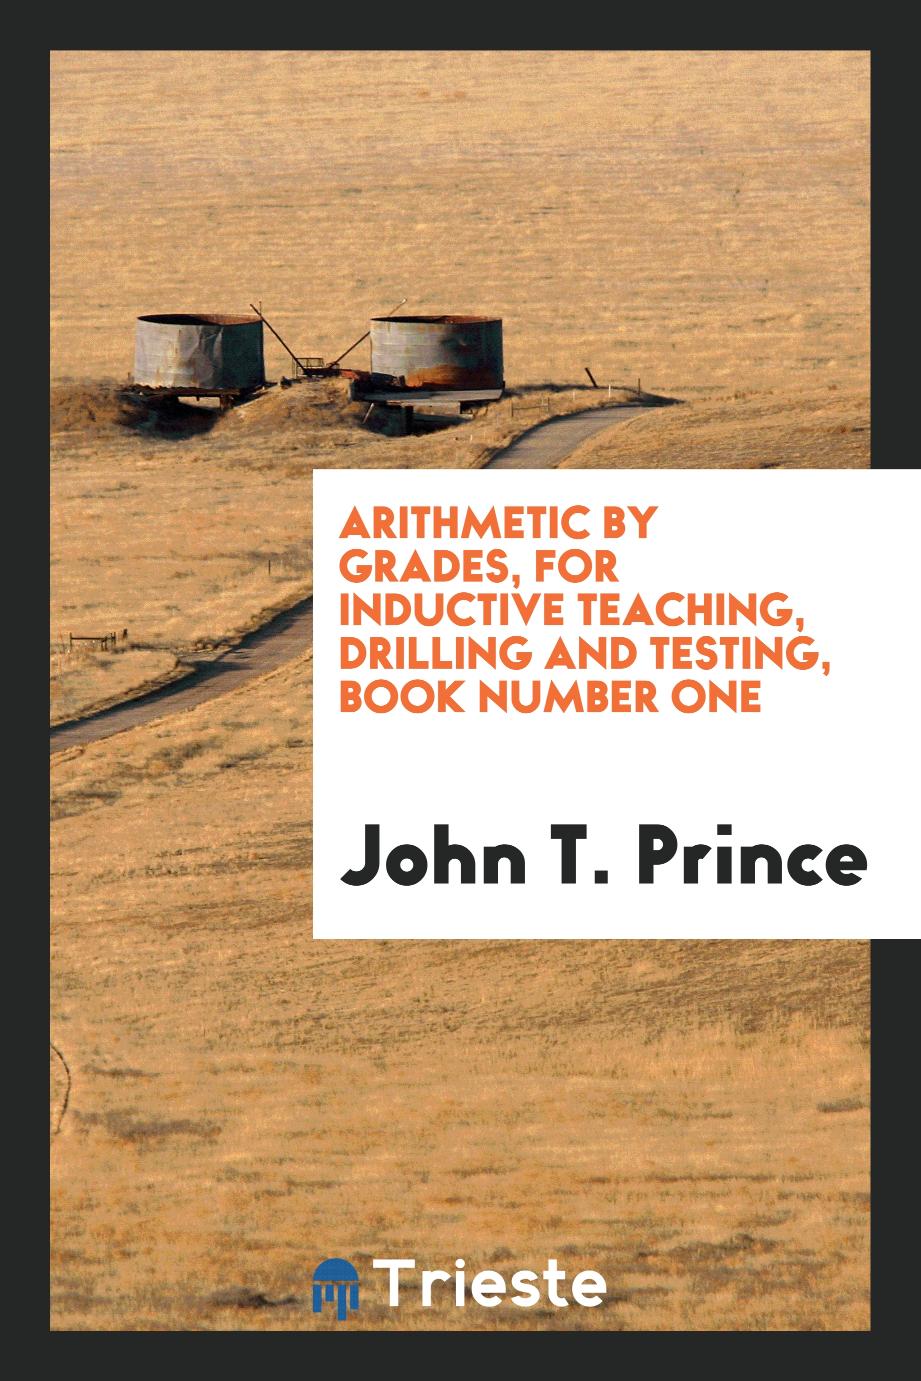 Arithmetic by Grades, for Inductive Teaching, Drilling and Testing, Book Number One